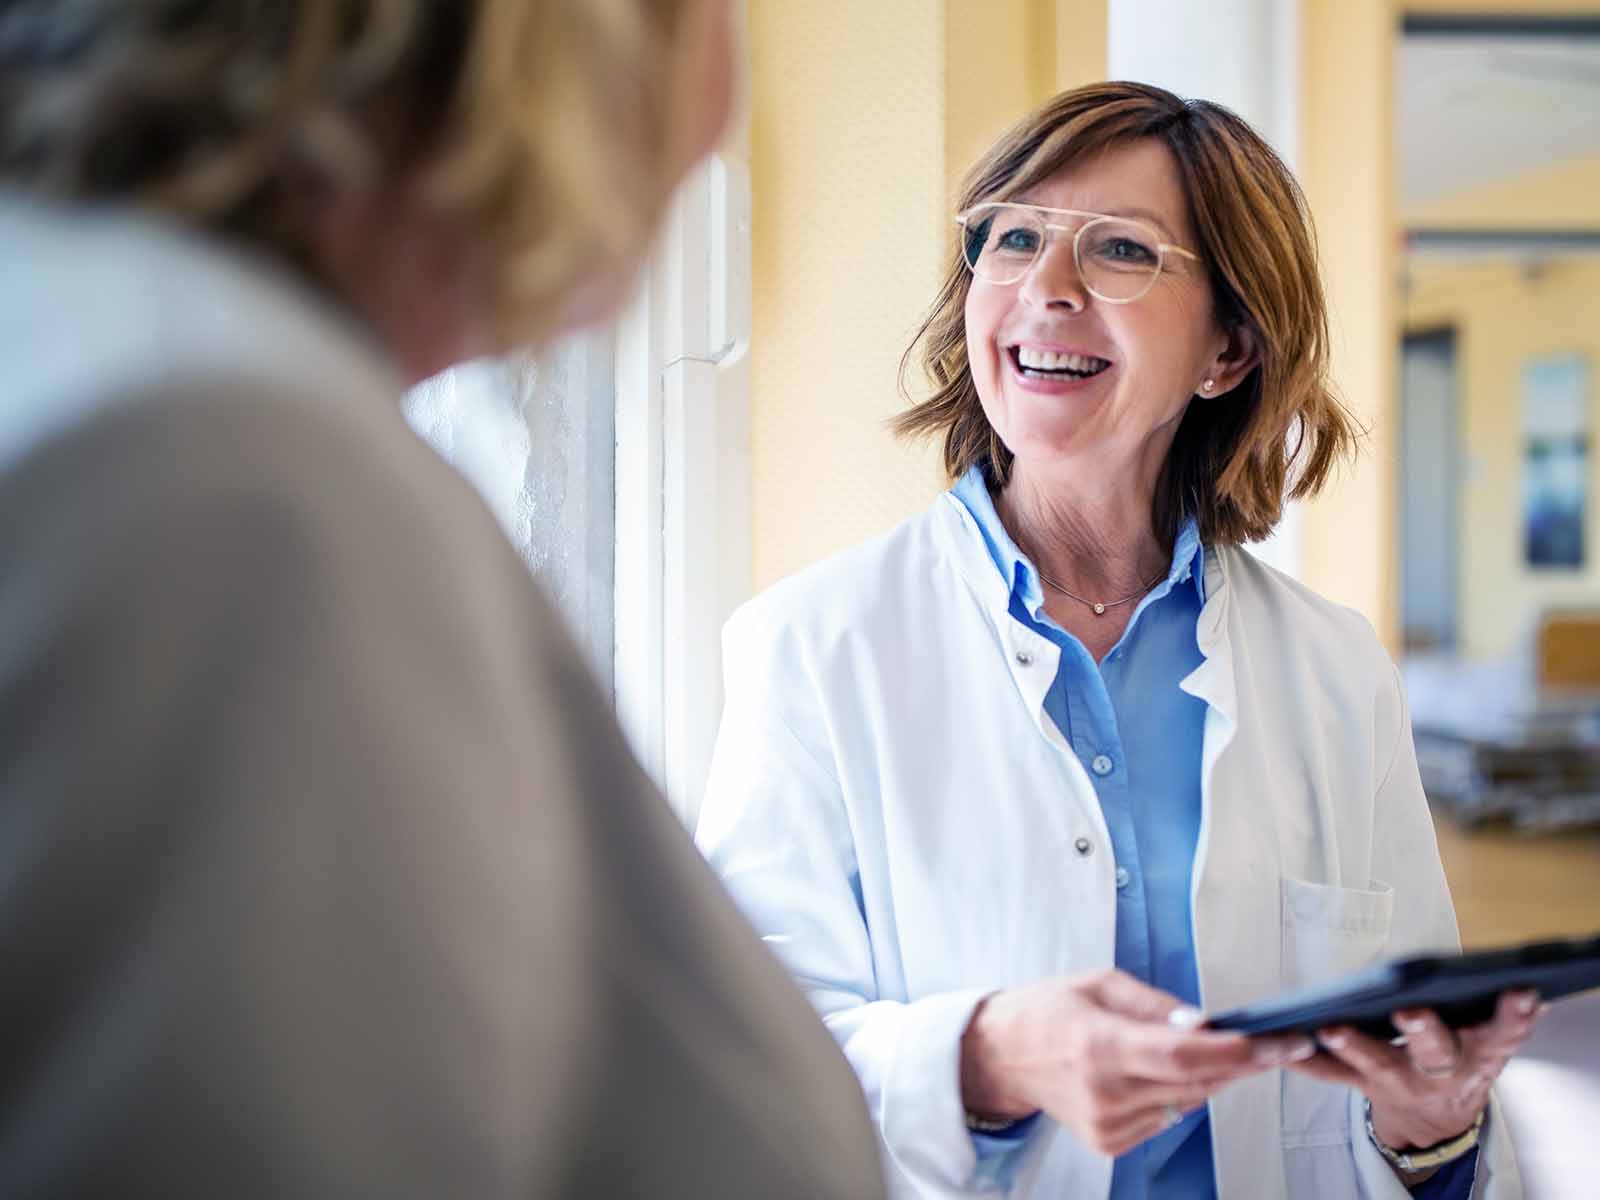 A practitioner holds a tablet computer while smiling and talking to a patient in medical facility